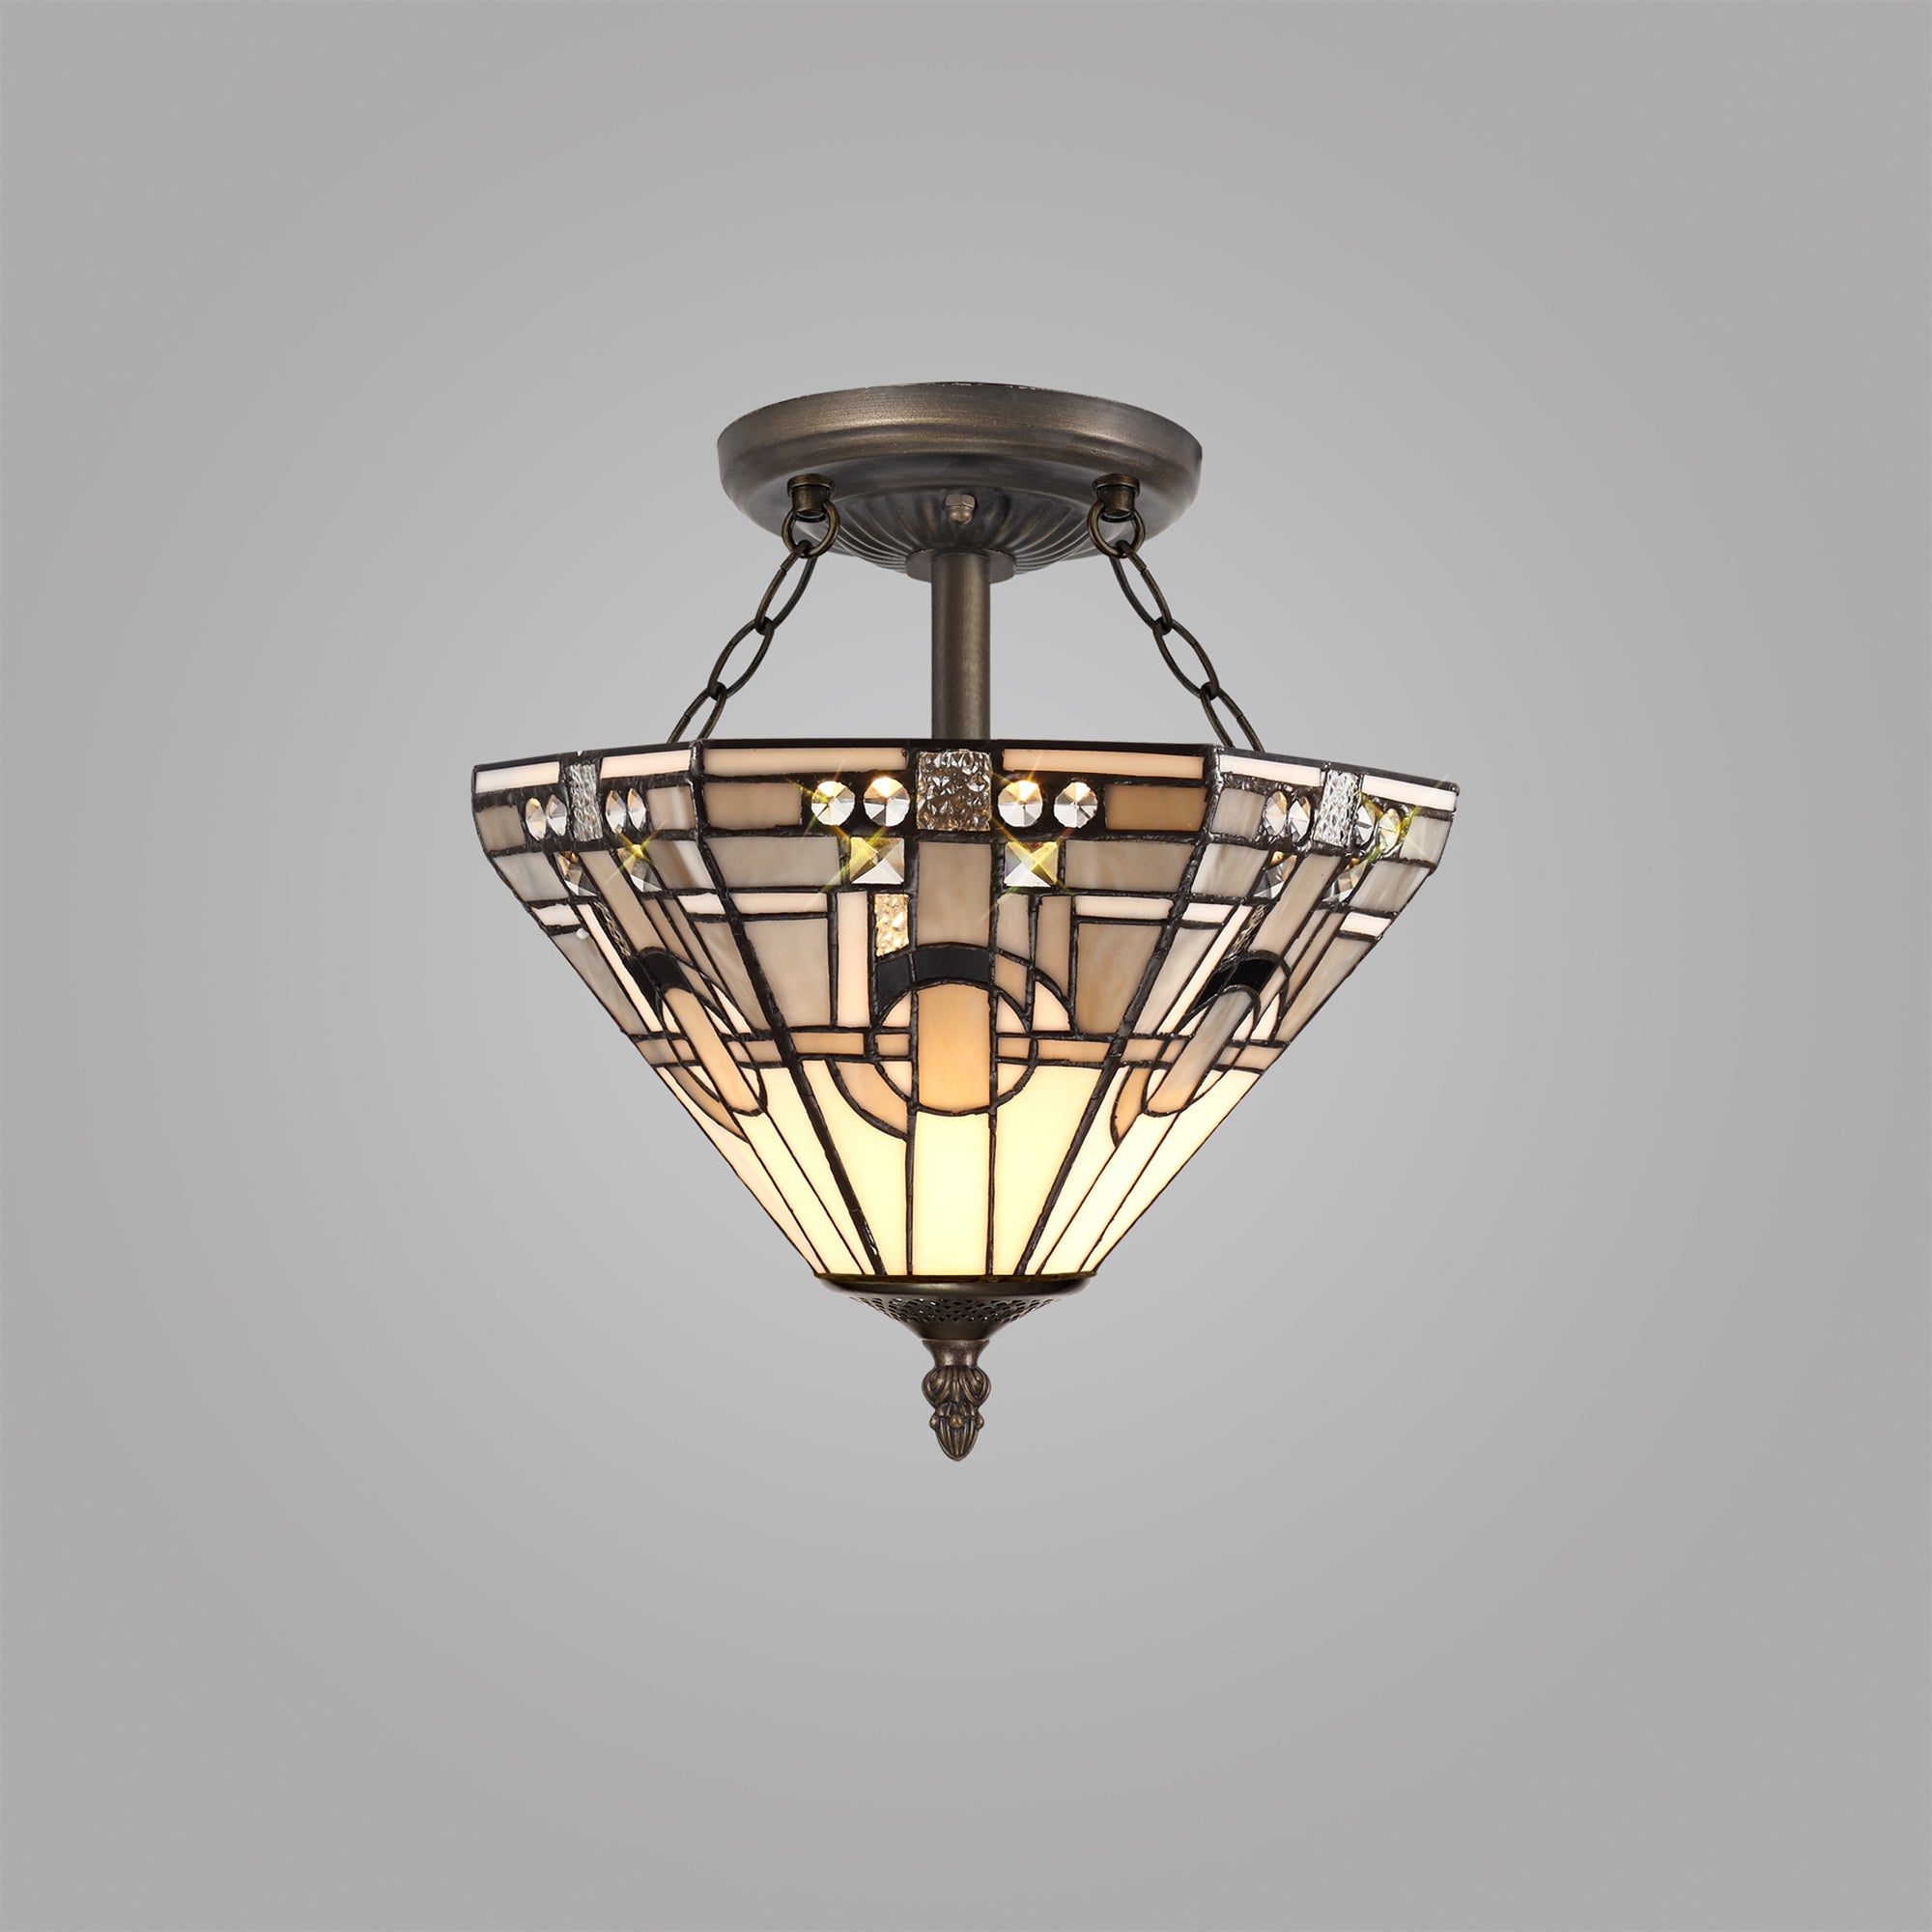 Atek 2 Light E27 Semi Ceiling With Tiffany Shade 30cm Shade, White/Grey/Black/Clear Crystal/Aged Antique Brass